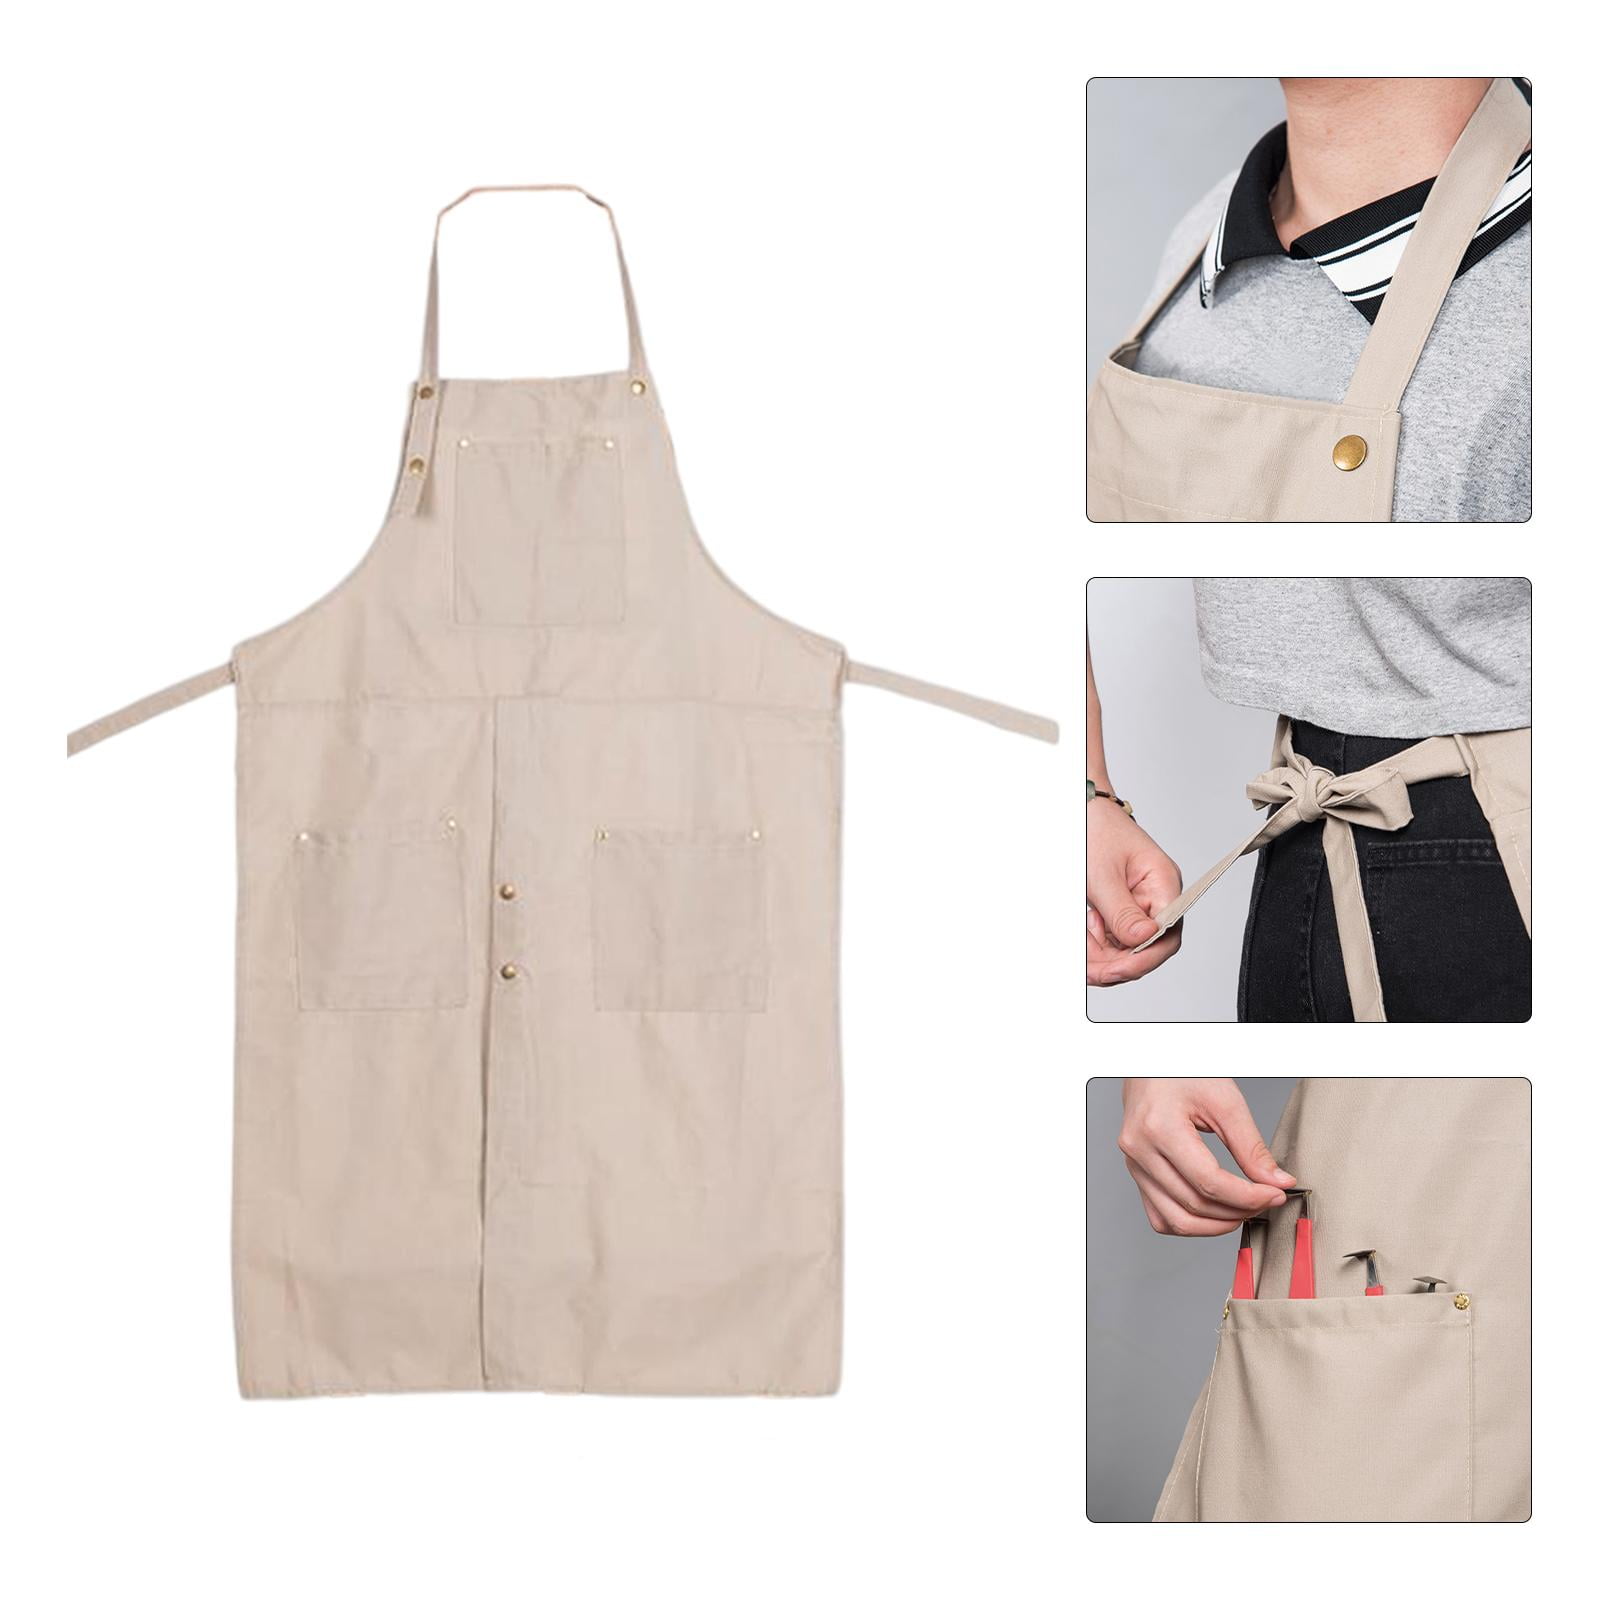 2x Pottery Apron Split Leg Water Resistant Adjustable Ceramics Apron for Women or Men Lightweight Comfortable Clay Apron with Pockets, Size: 137x64CM